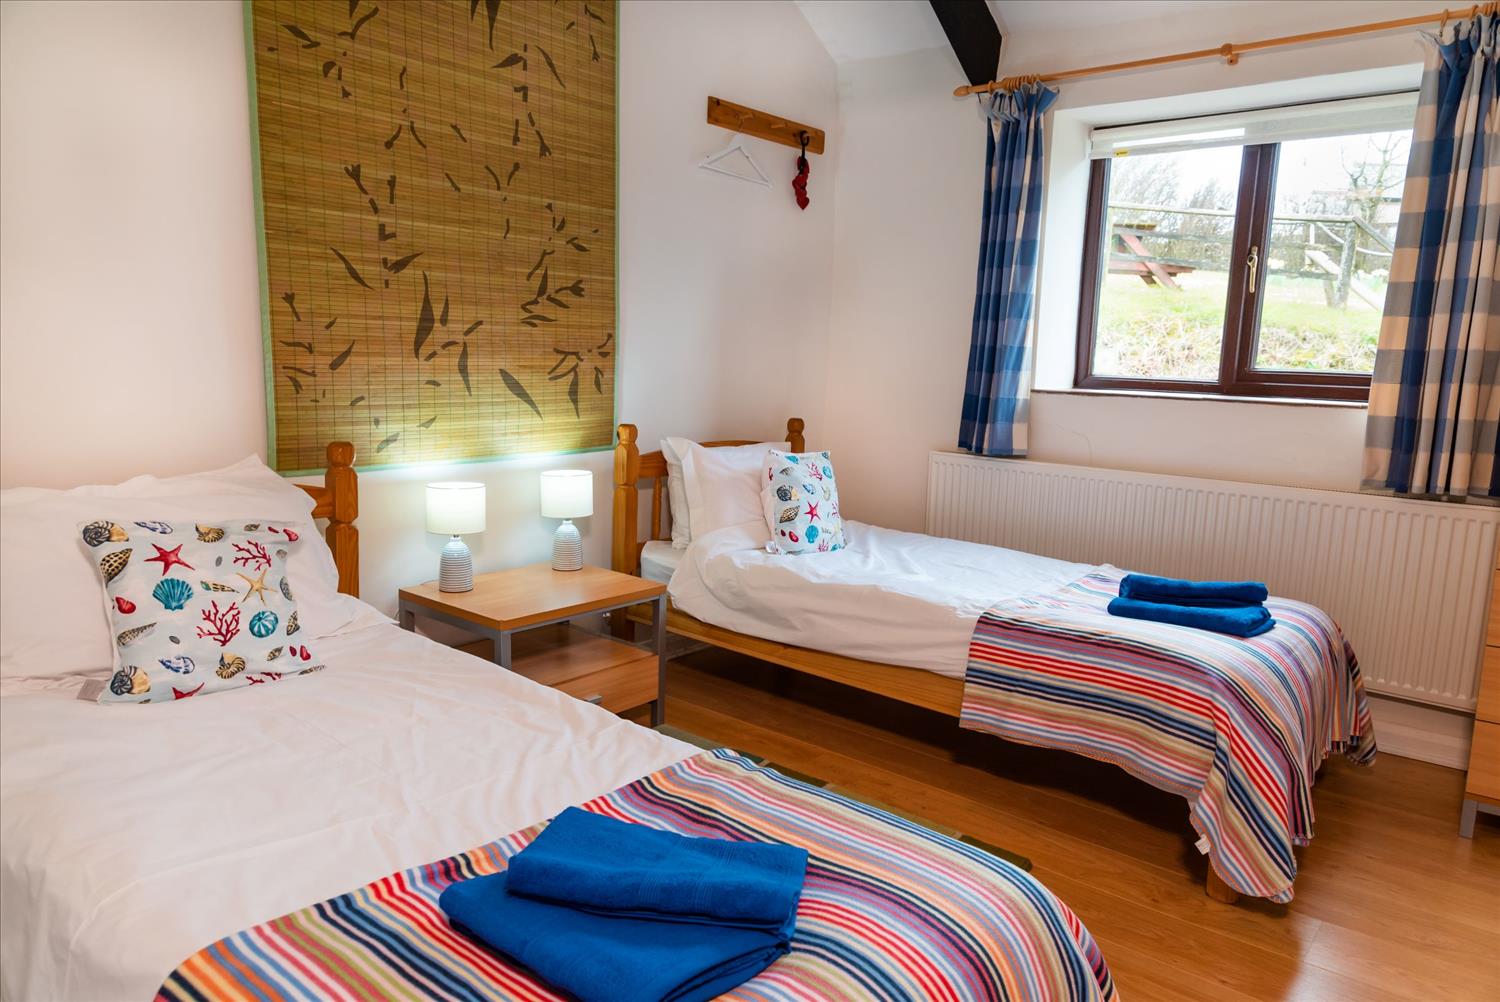 The twin bedroom at Polrunny Farm's Elderberry Cottage, with blue towels on the end of the beds, and a tapestry hung on the wall